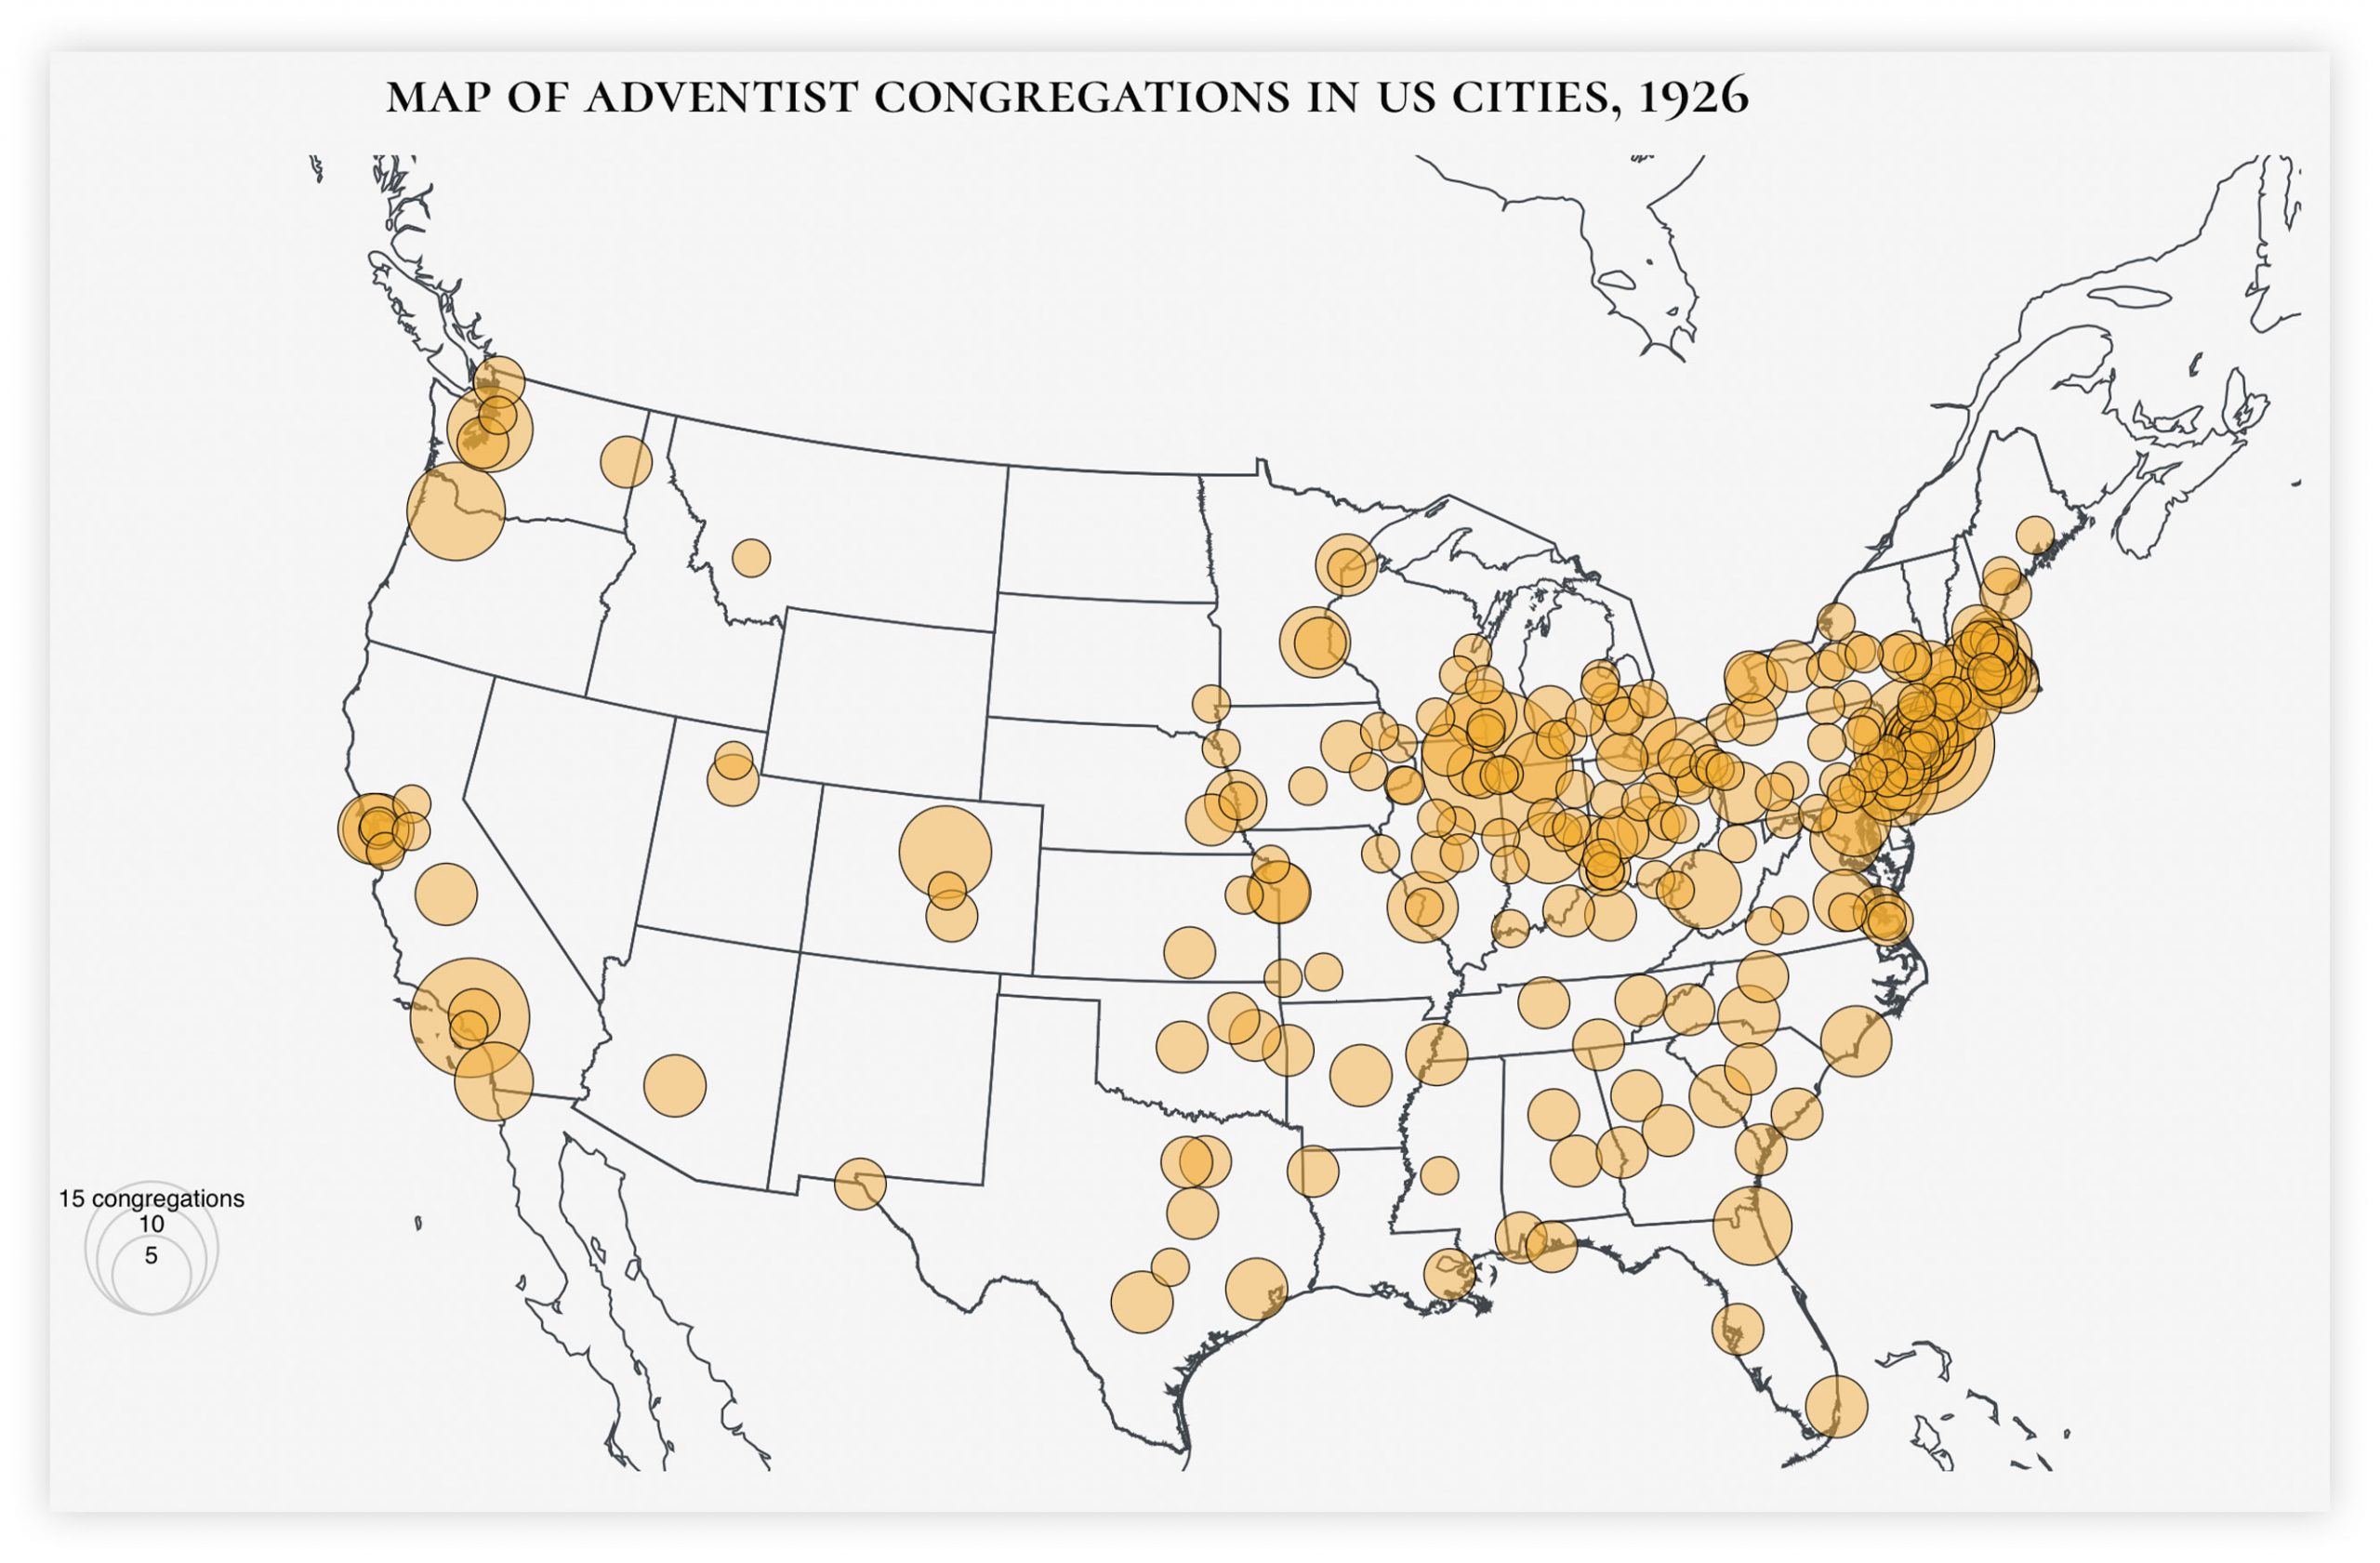 Map of the United States showing a circle graph of the number of Adventist congregations in US cities in 1926.